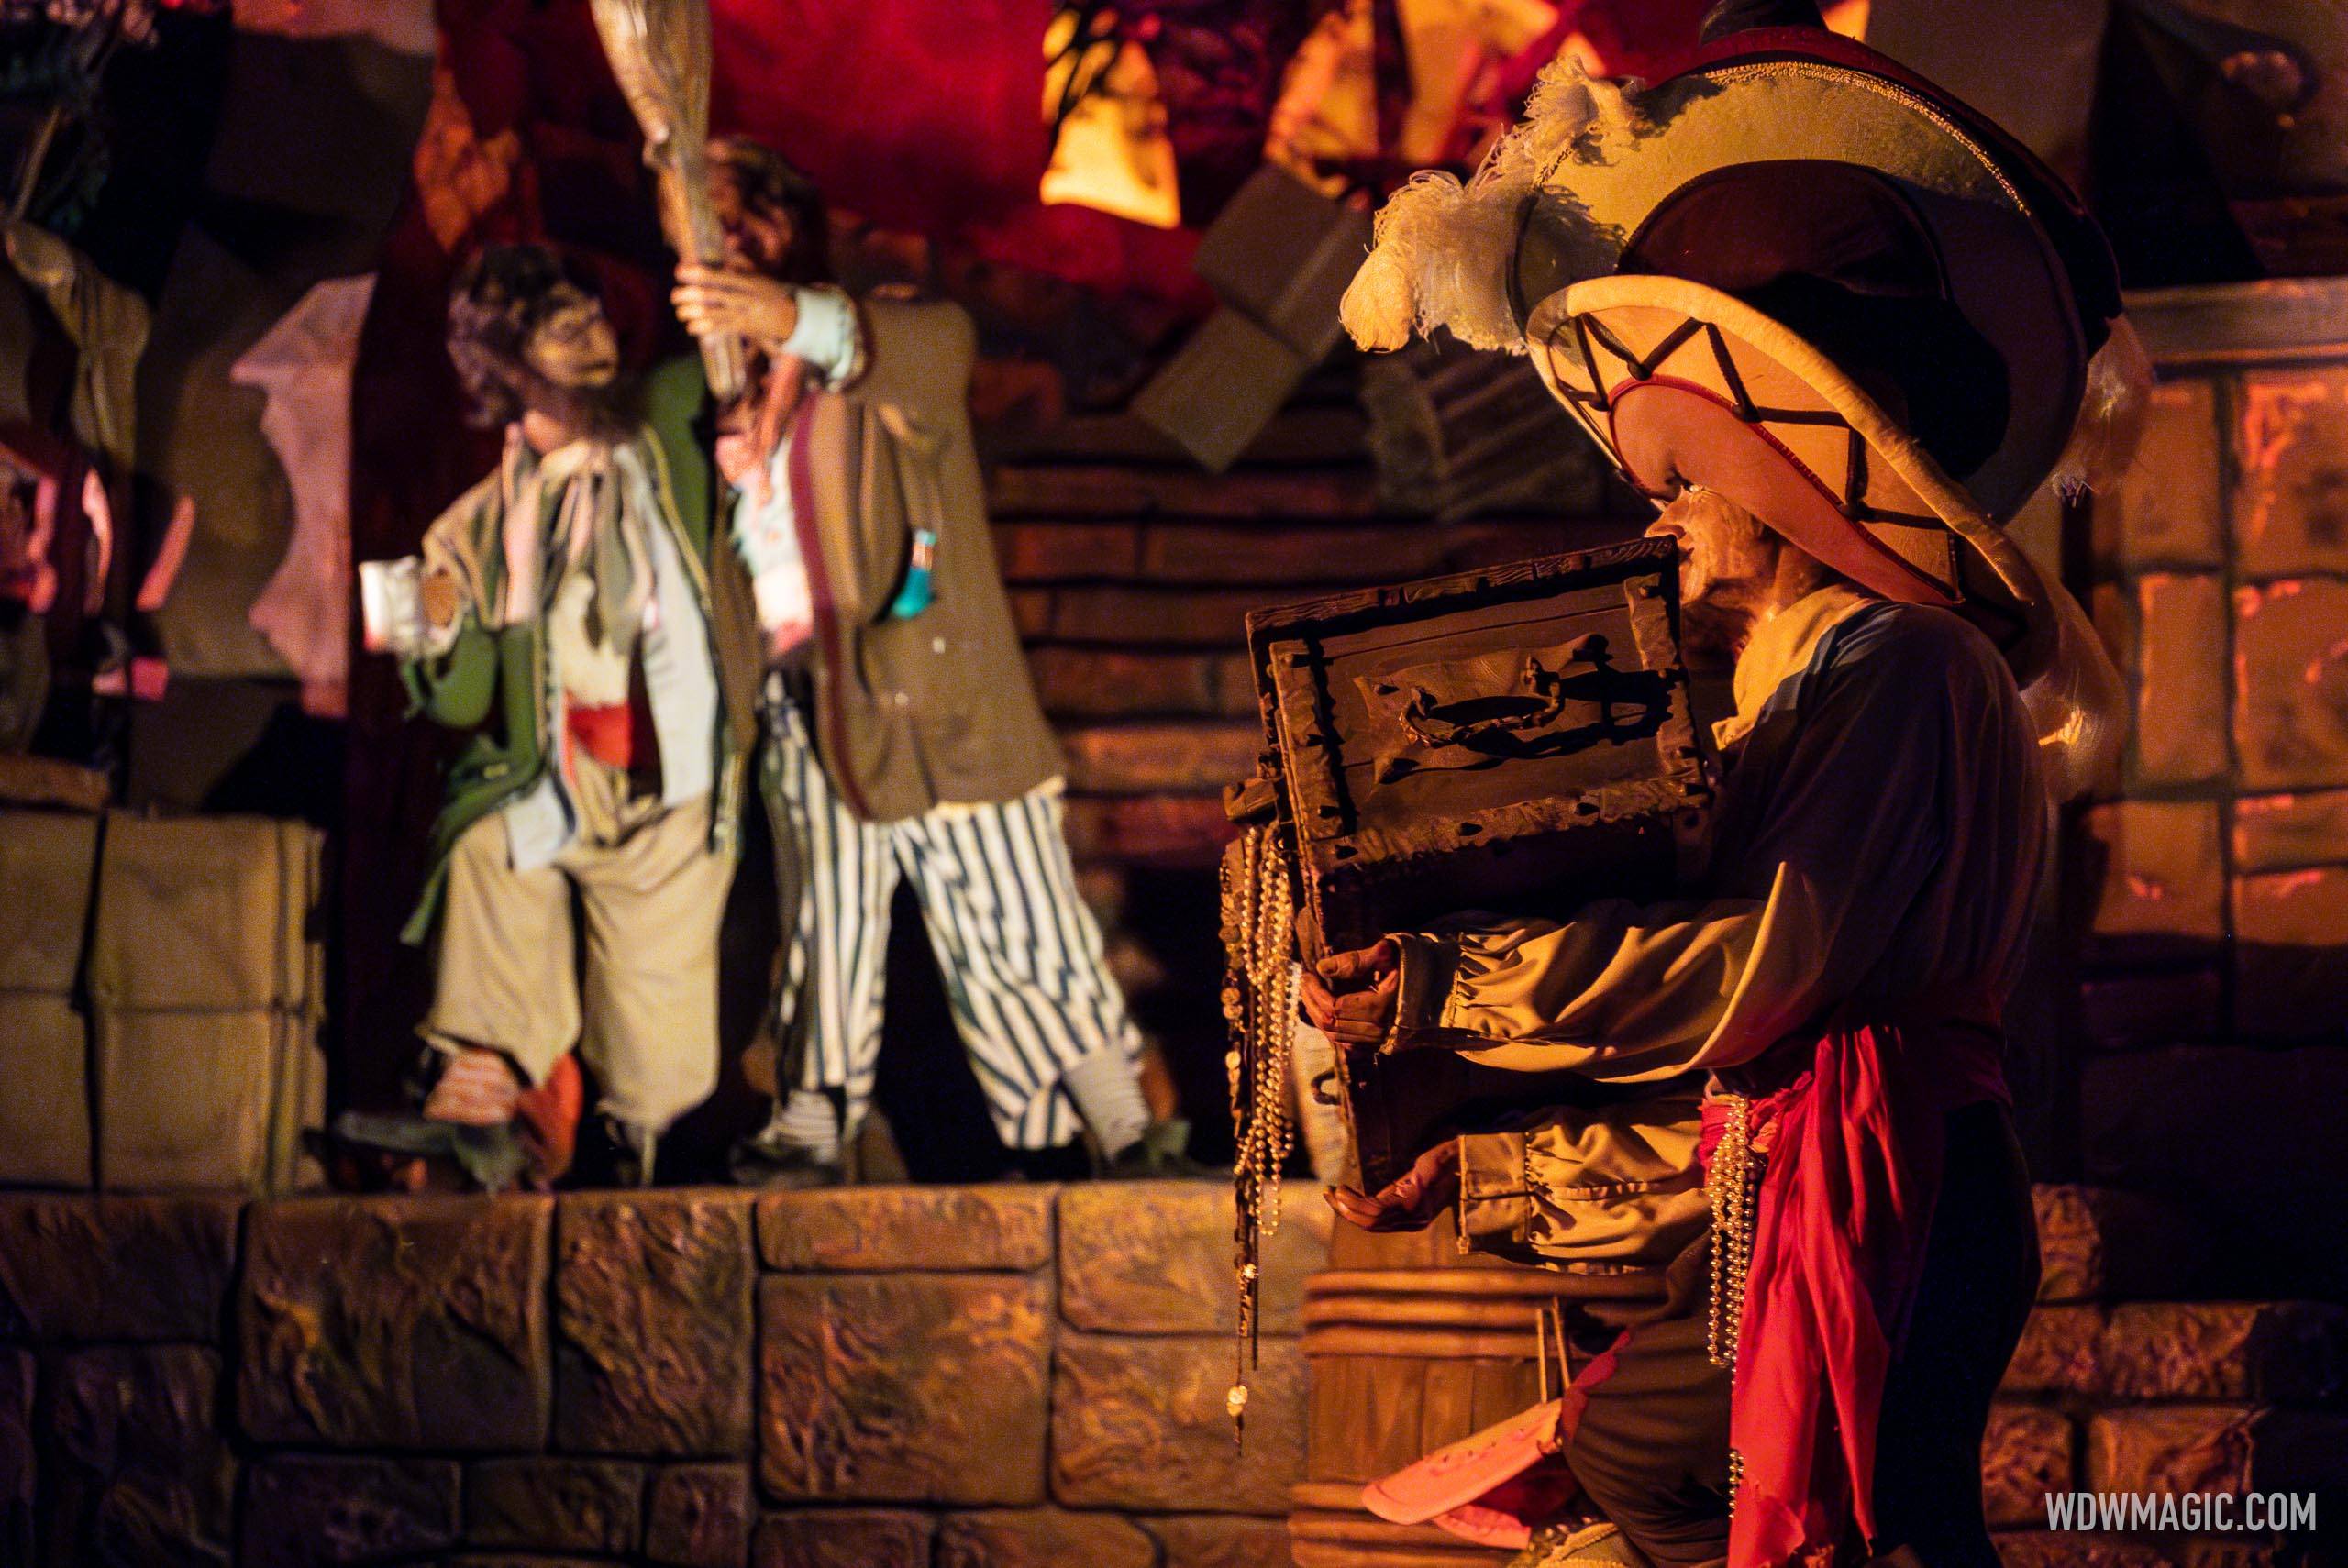 Pirates of the Caribbean expected to close for an extensive refurbishment later this year